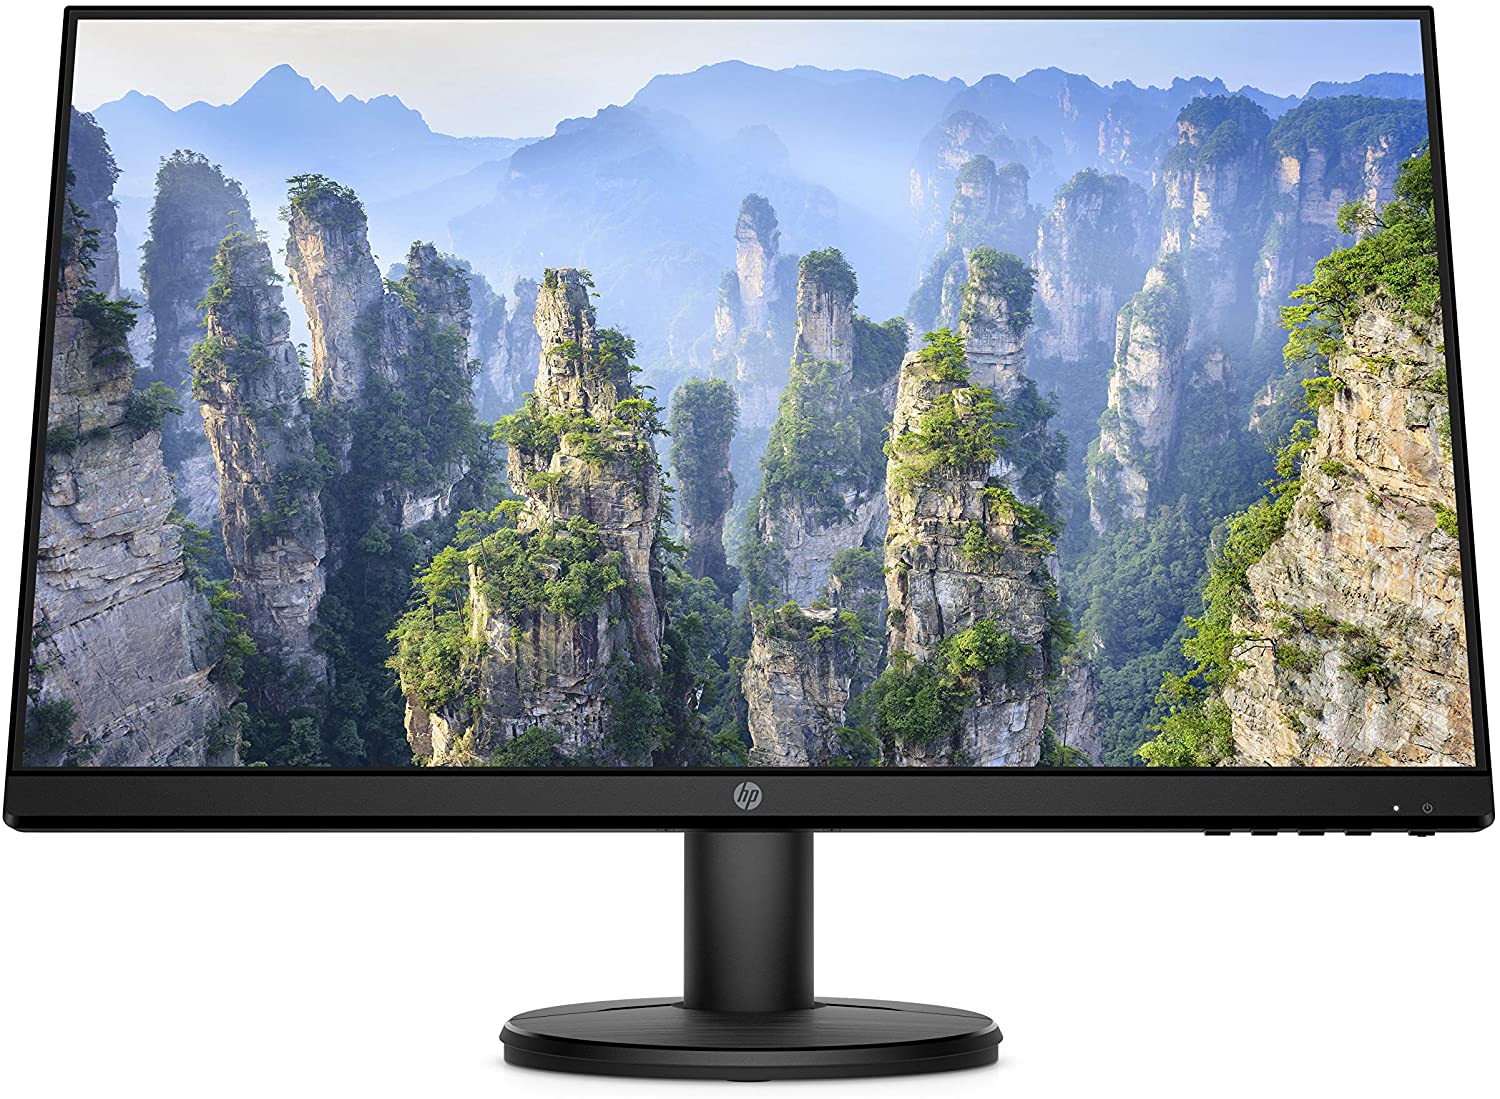 HP Monitor FHD V24i | 23.8-Inch Diagonal Full HD Computer Monitor with IPS Panel and 3-Sided Micro-Edge Design | Low Blue Light Display (9RV15AA#ABA)2